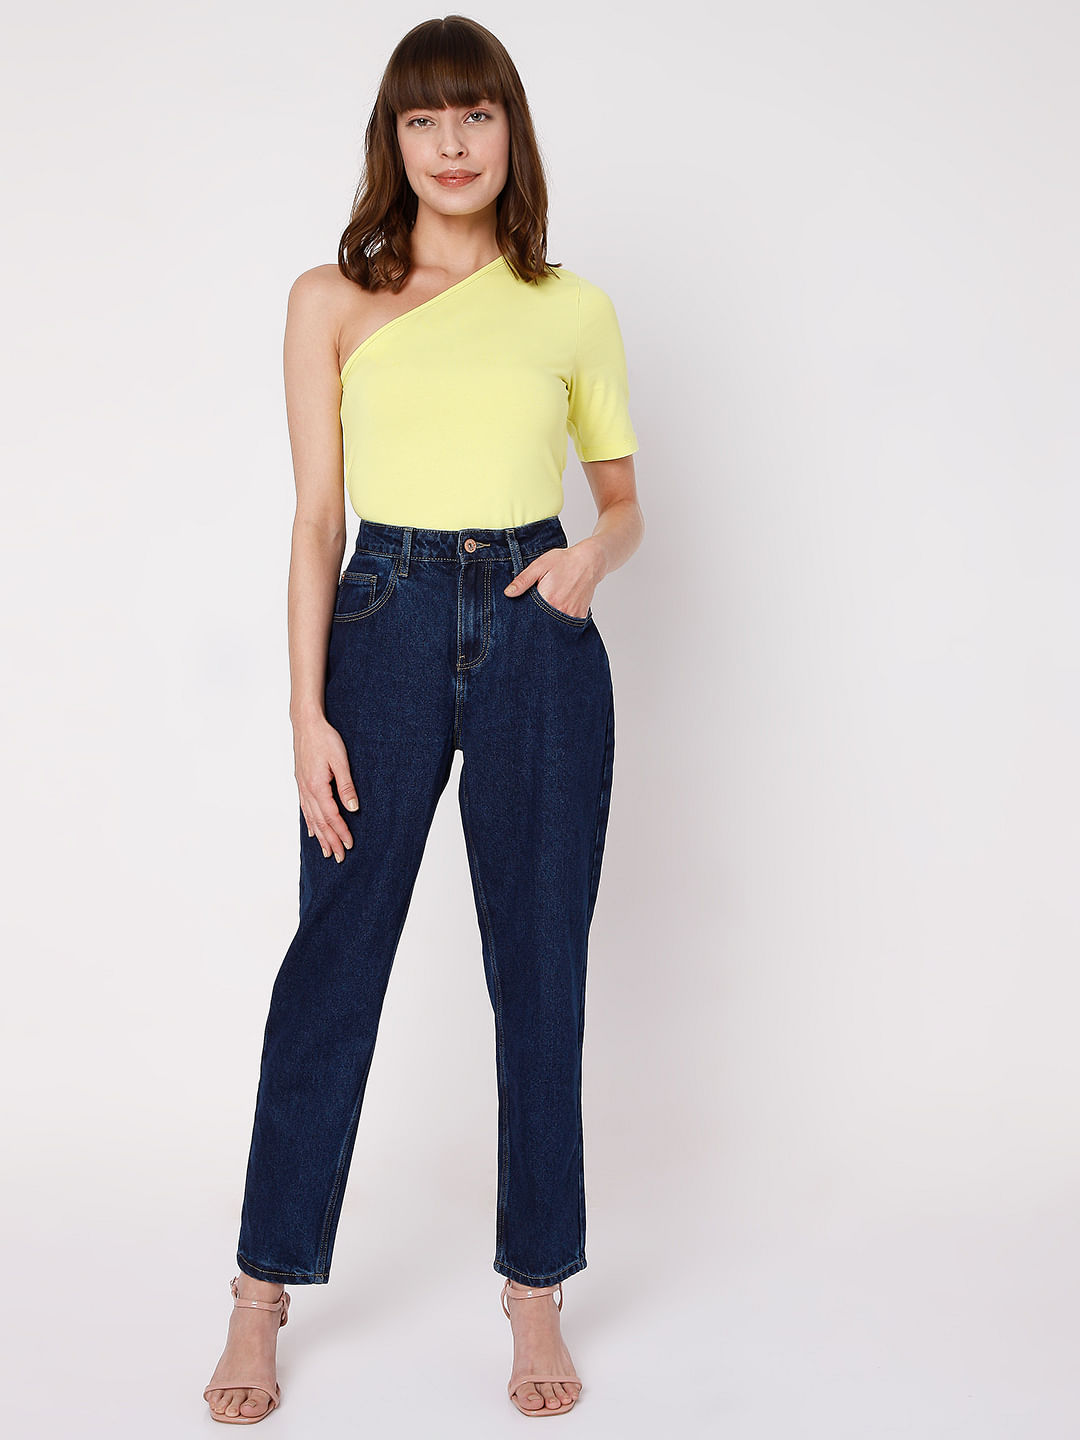 DFLYHLH High Waist Jeans Women Bubble Butt Stretch India | Ubuy